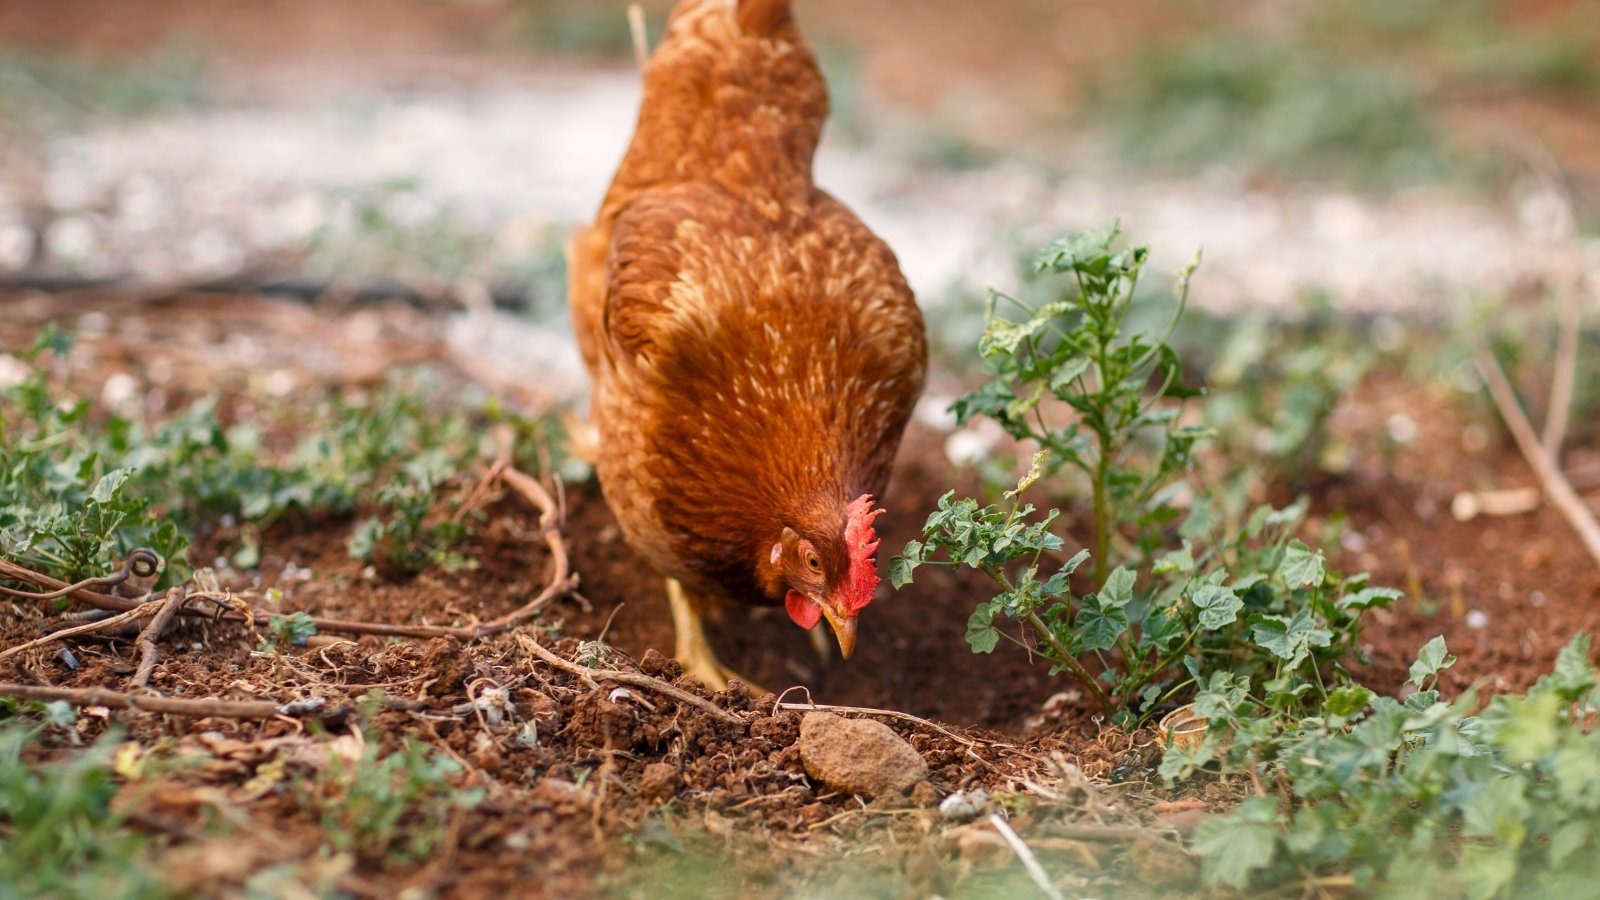 Close-up of a red hen walking through a garden bed among loose dark brown soil with growing ground covers.